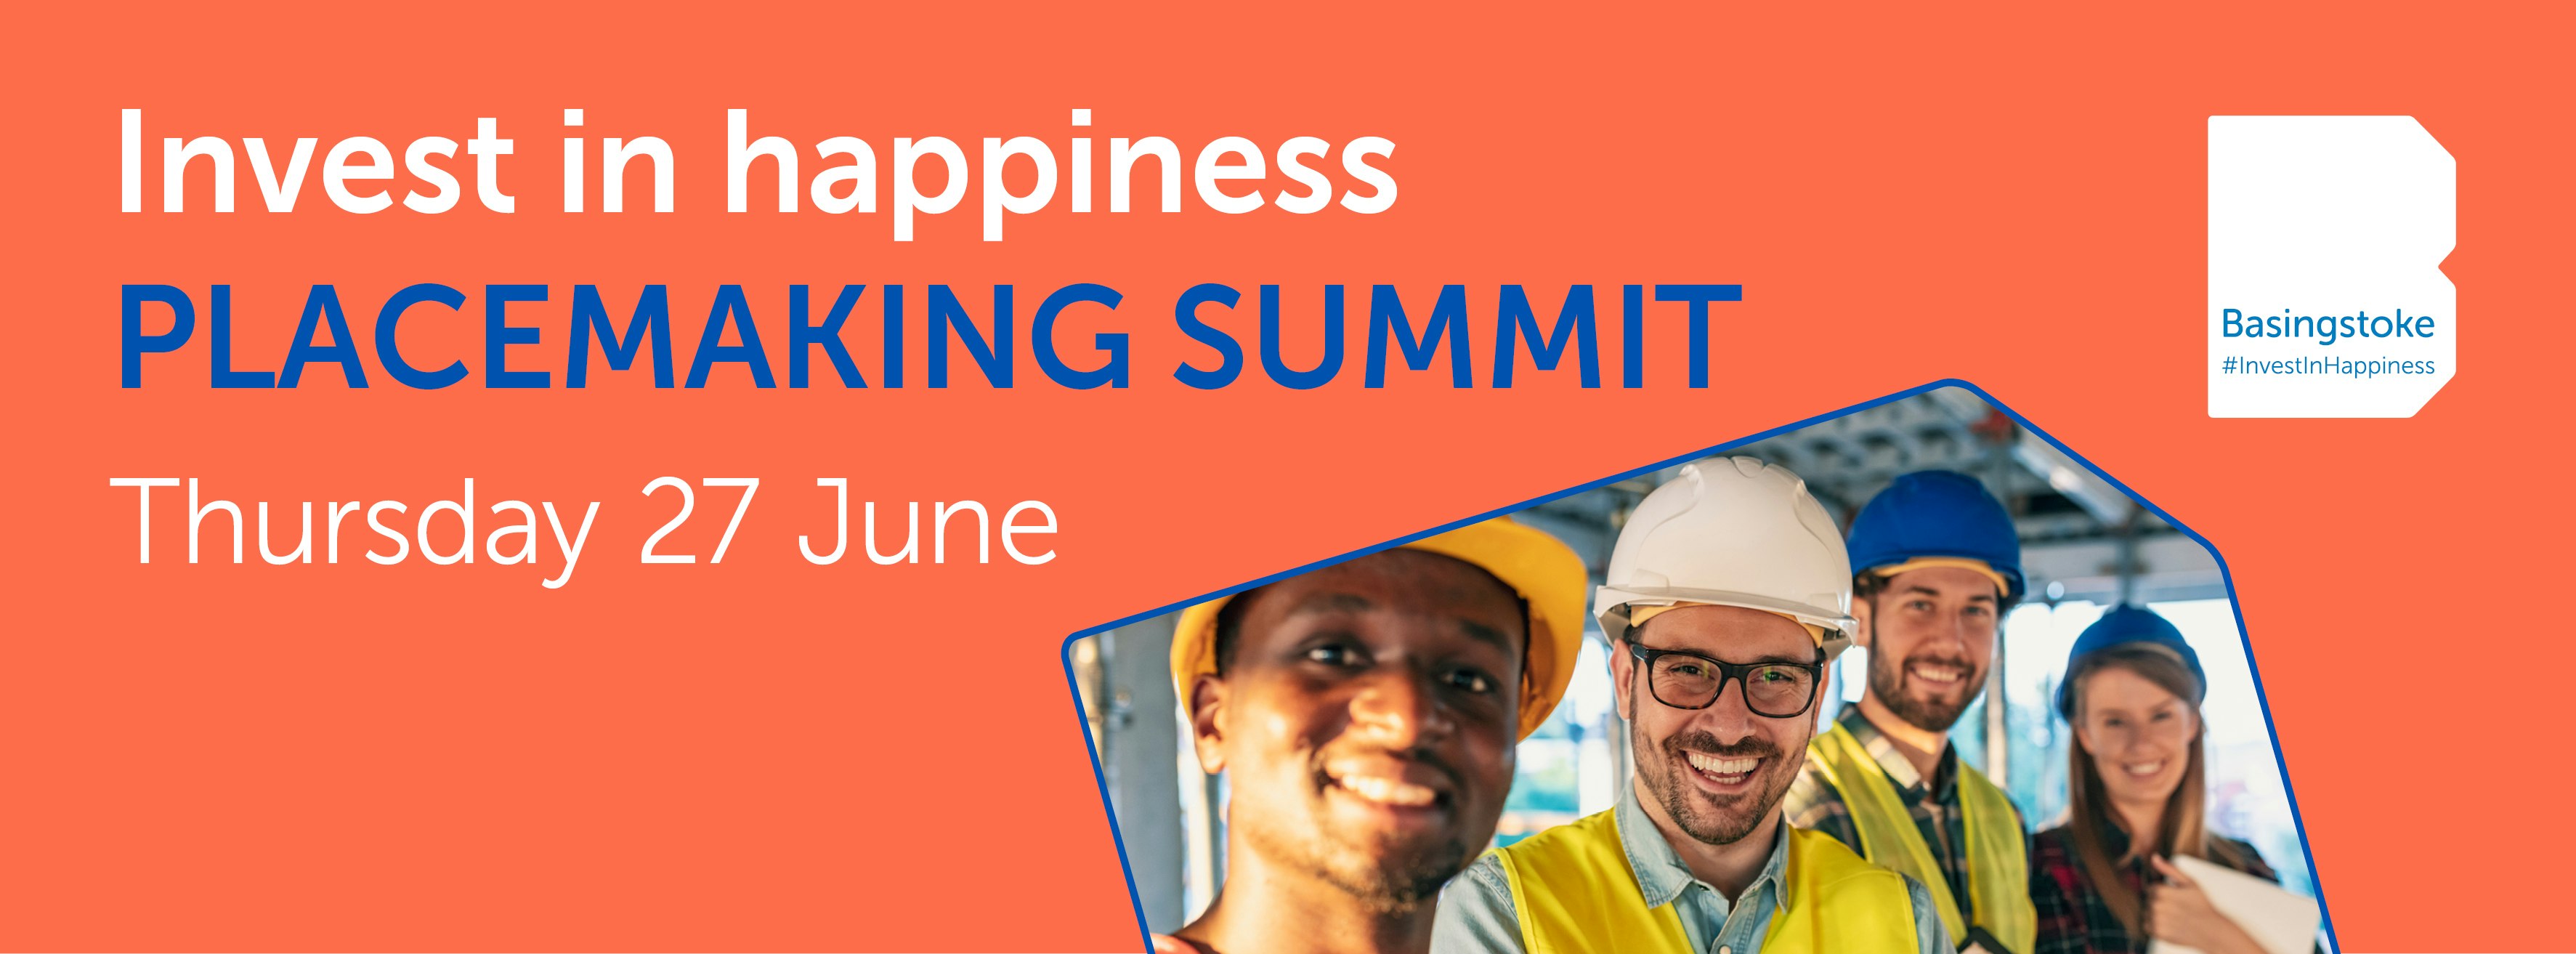 Invest in happiness Placecmaking summit. Thursday 27 June.